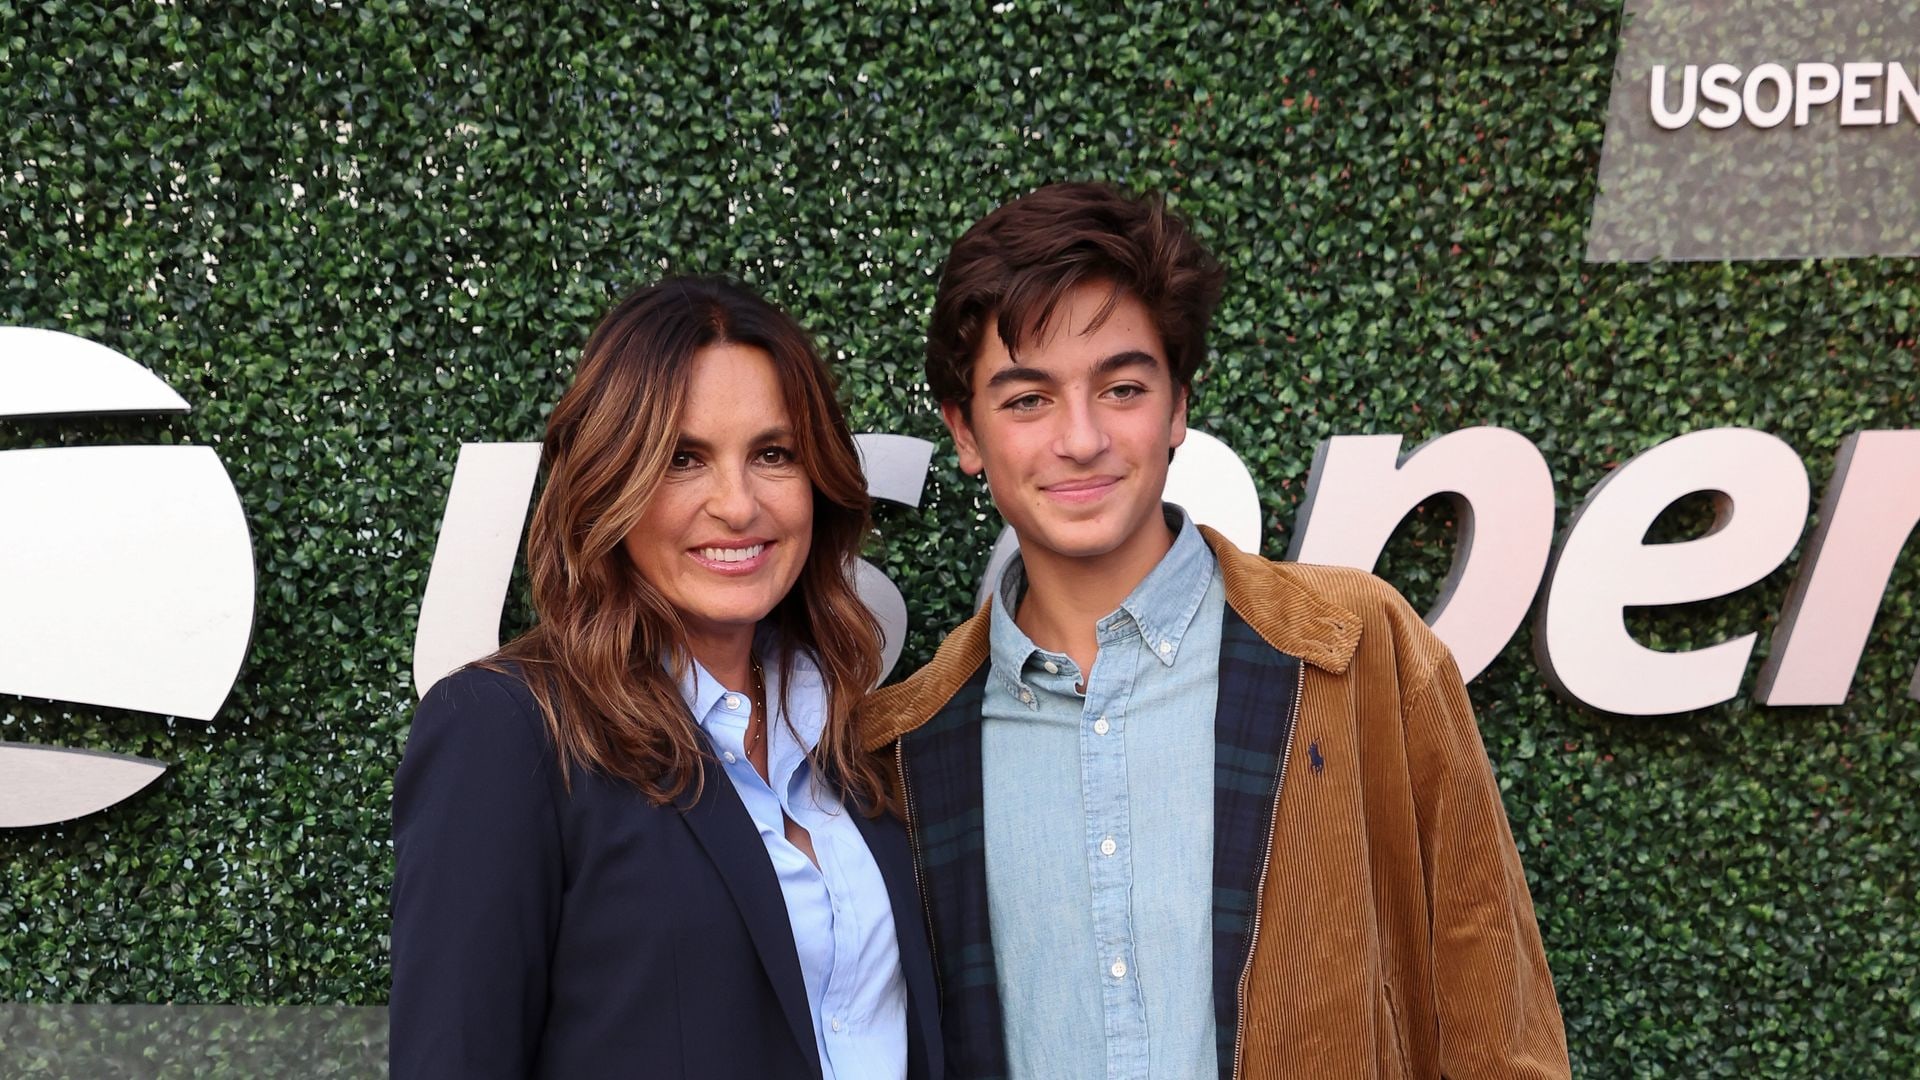 Mariska Hargitay, August Miklos Friedrich Hermann attend day 12 of the US Open 2022, 4th Grand Slam of the season, at the USTA Billie Jean King National Tennis Center on September 9, 2022 in Queens, New York City